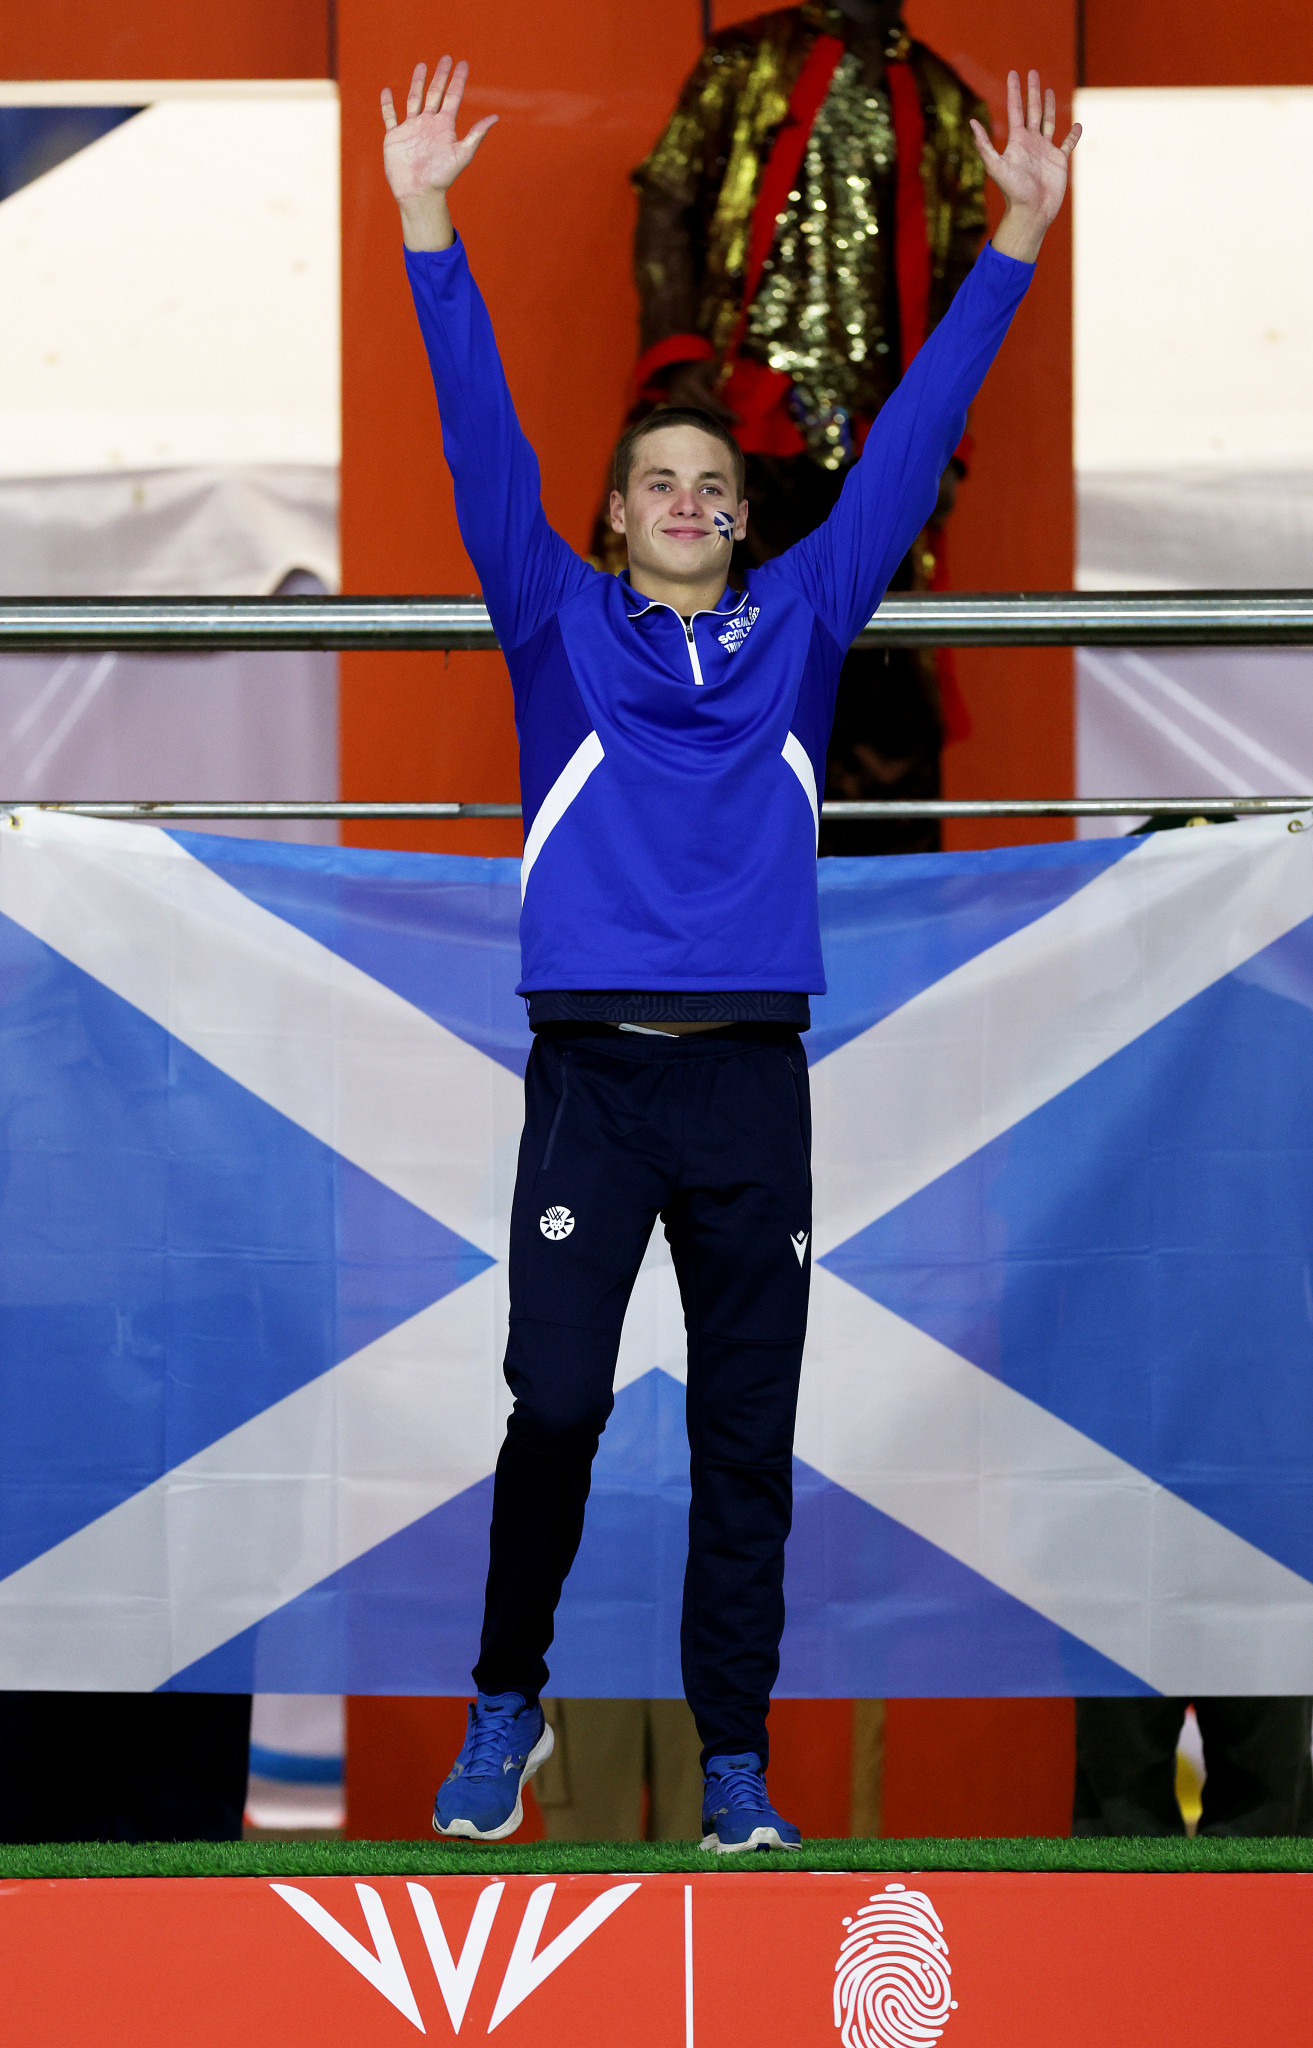 Matthew Ward dominated the men's 100 metres backstroke final to earn Scotland's third swimming gold of the day ©Getty Images